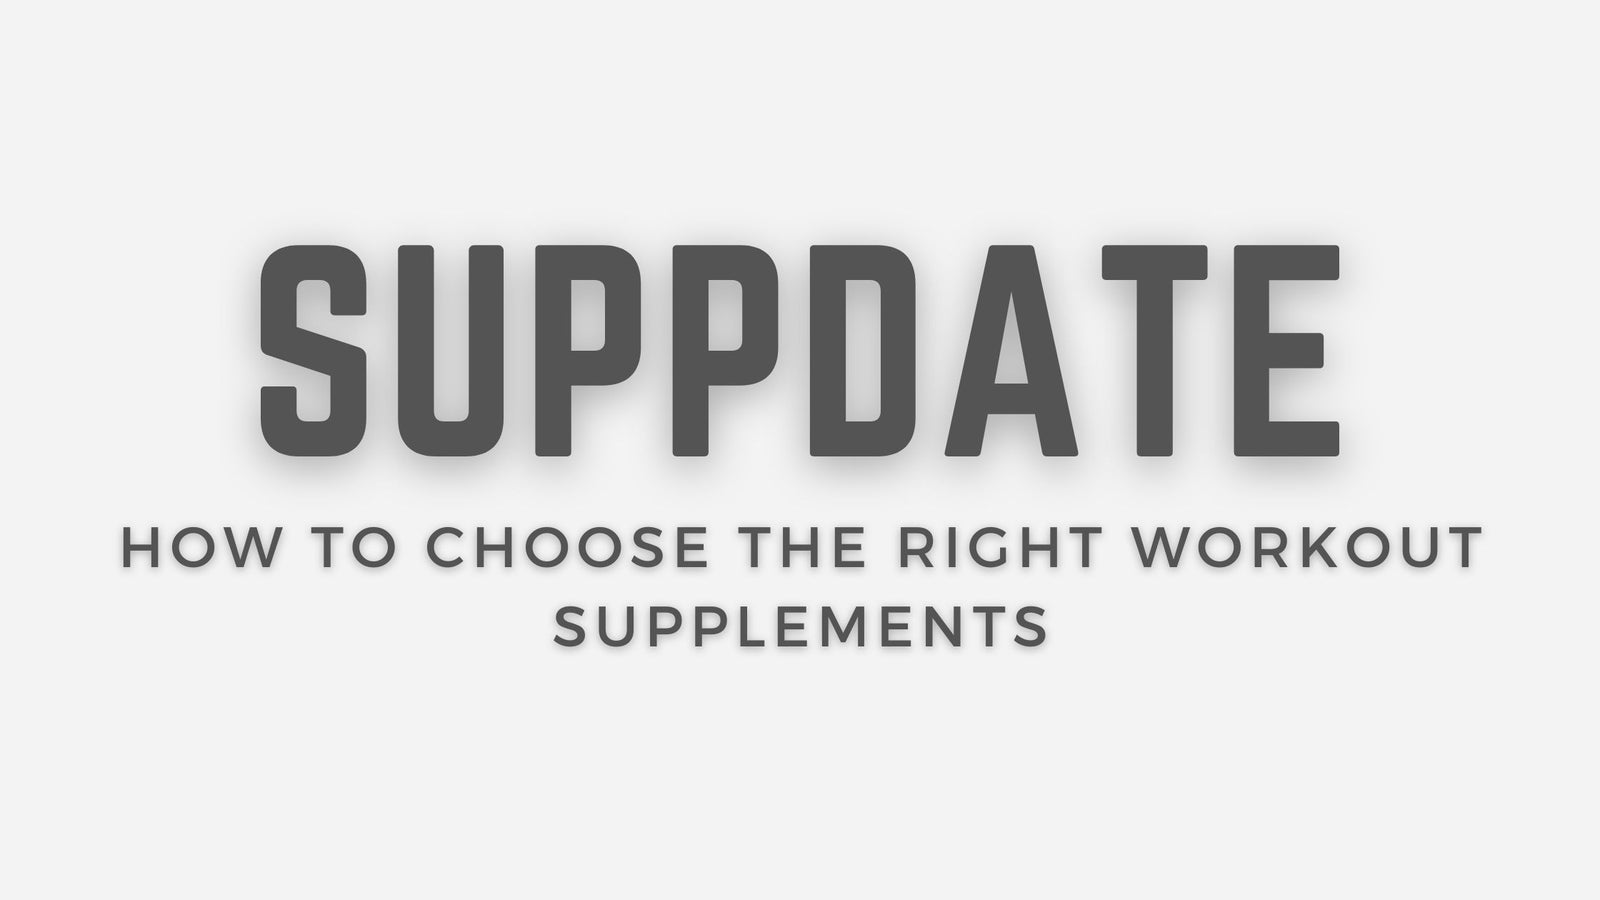 How to Choose the Right Workout Supplements